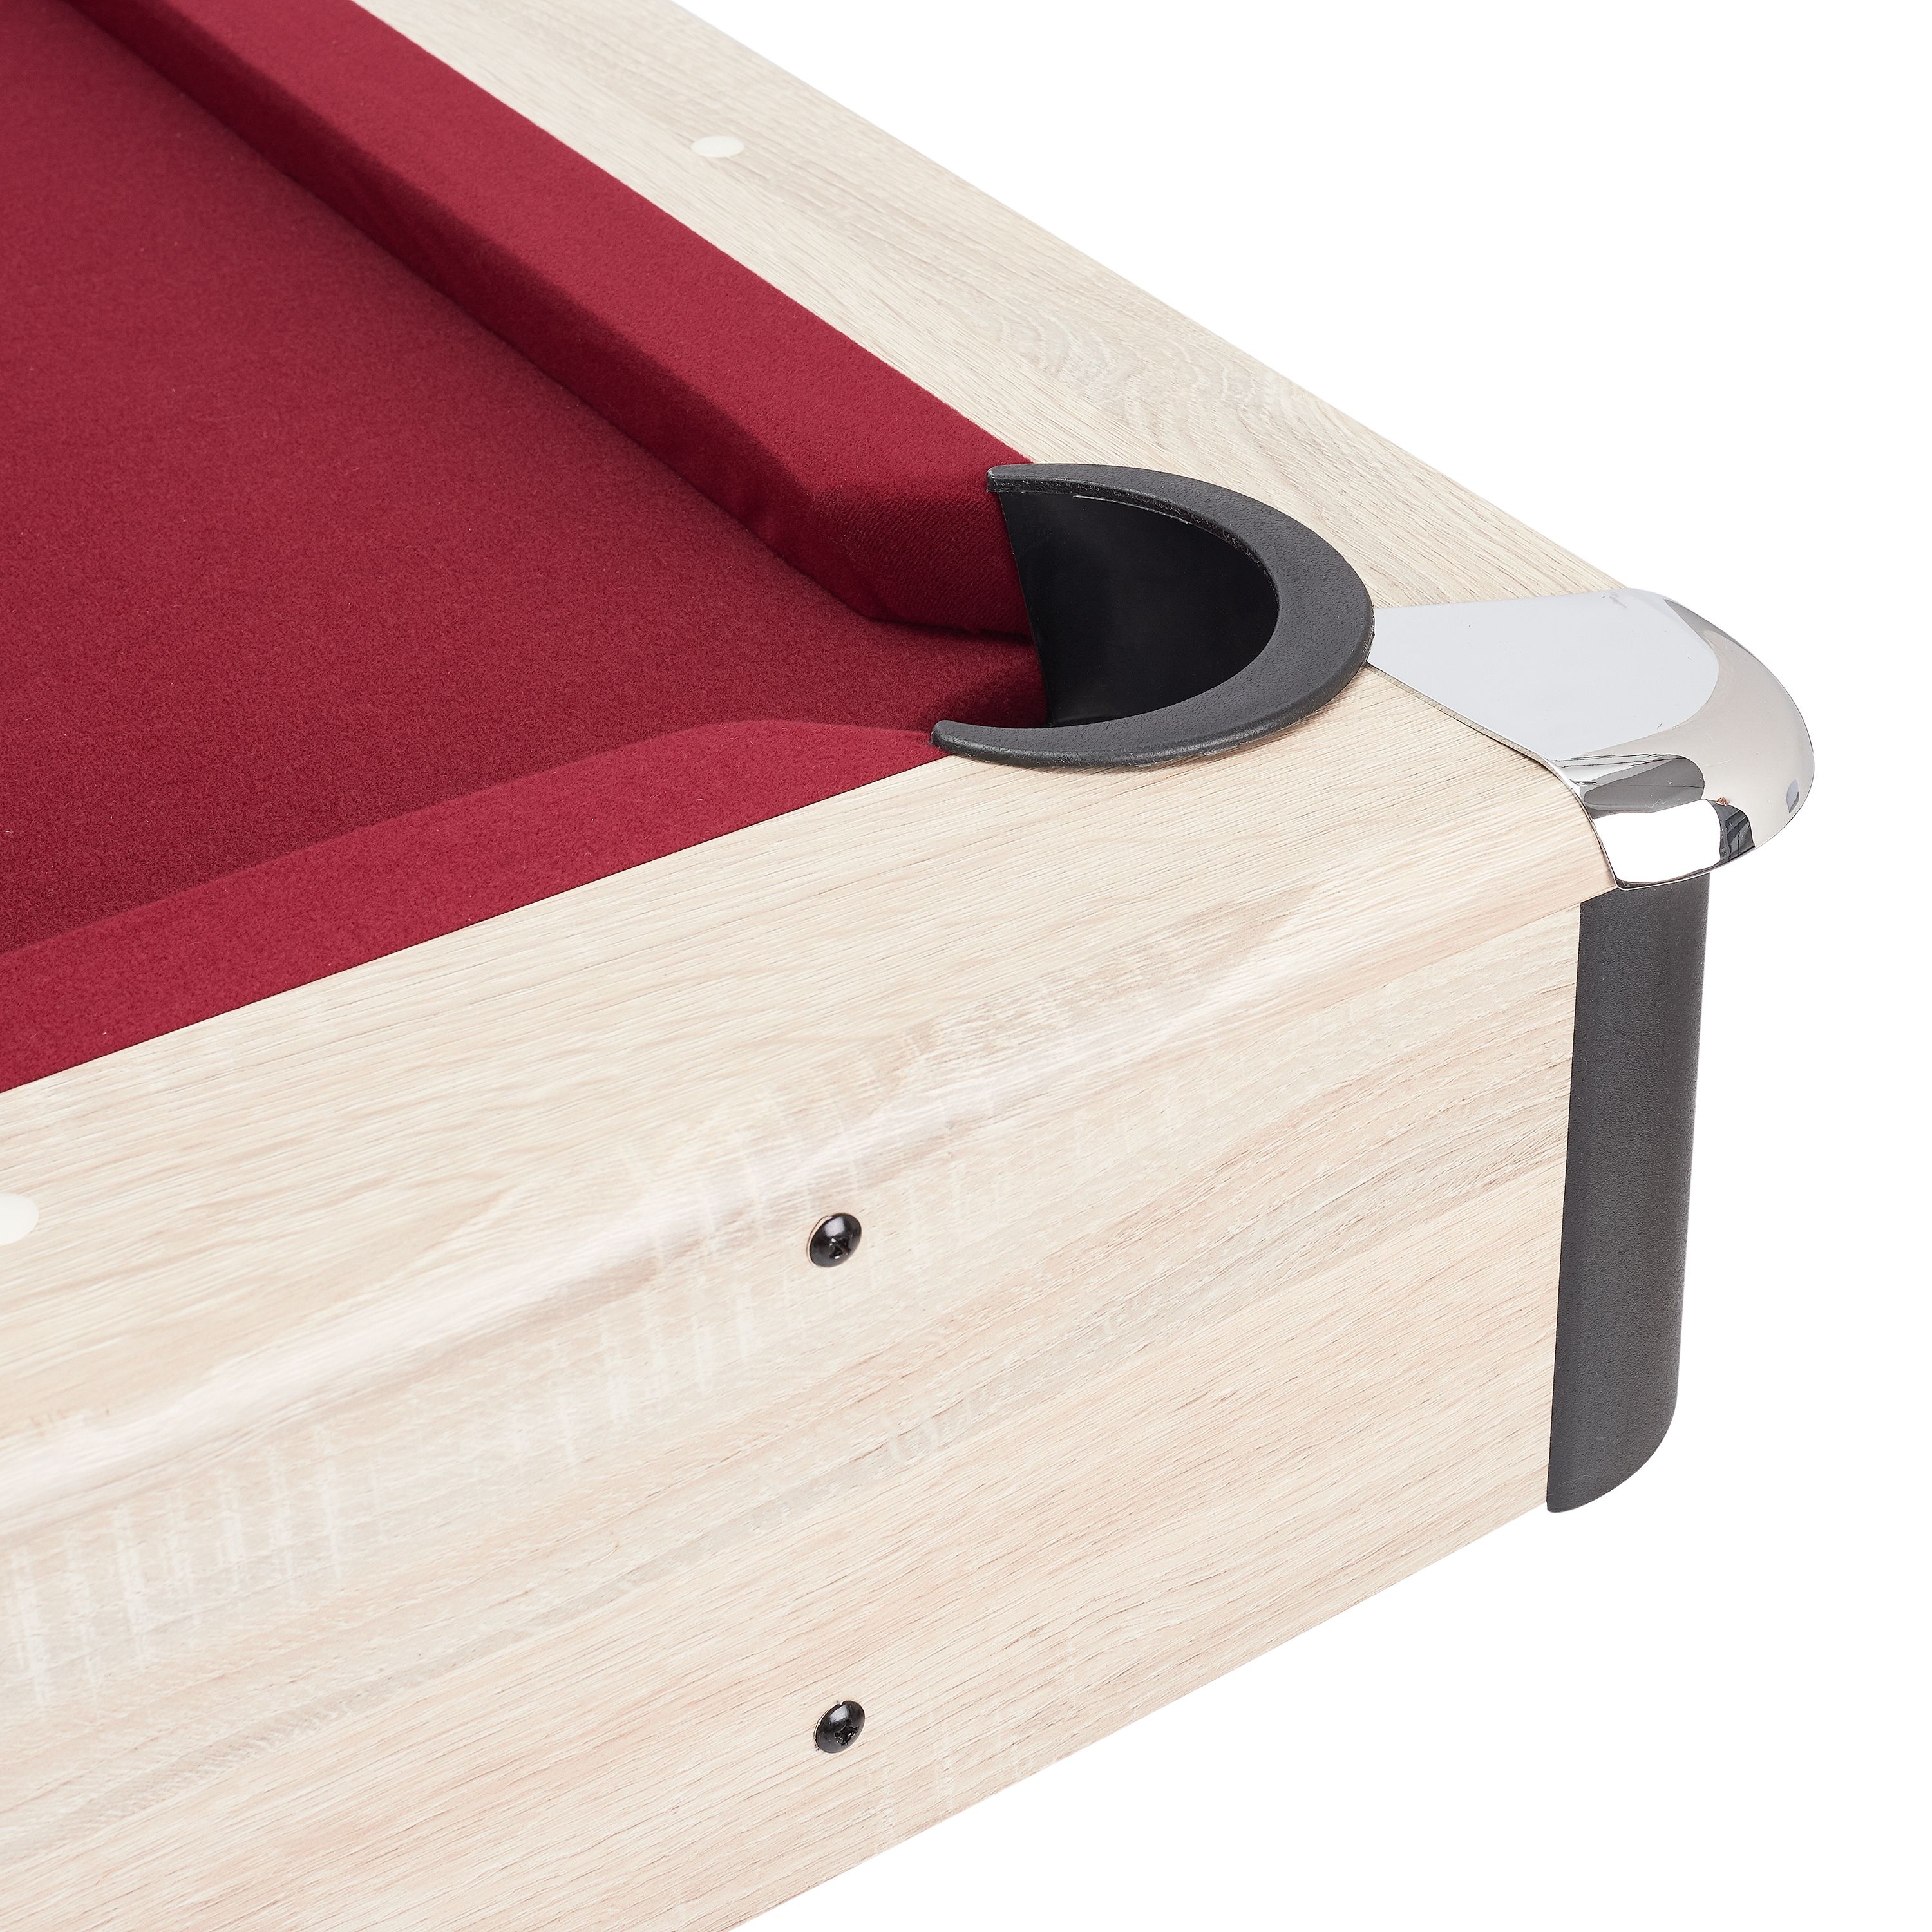 Airzone 84" Pool Table with Accessories, Red Felt - image 4 of 4